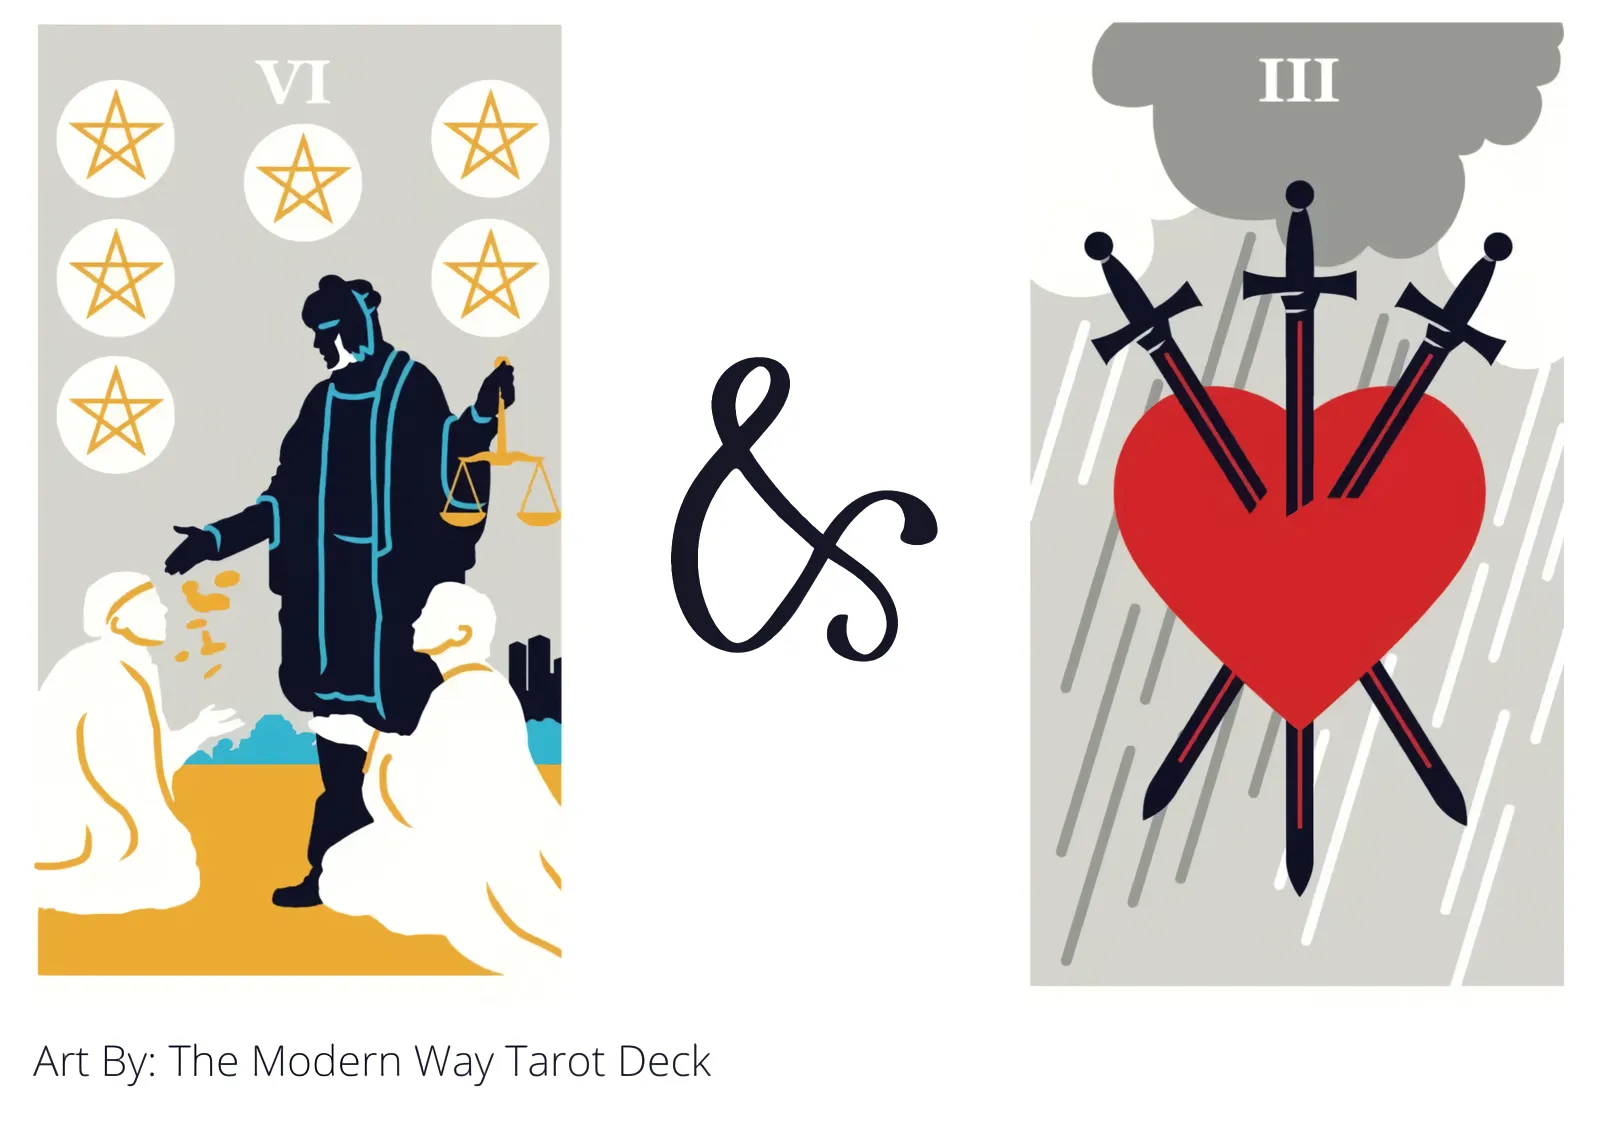 six of pentacles and three of swords tarot cards together